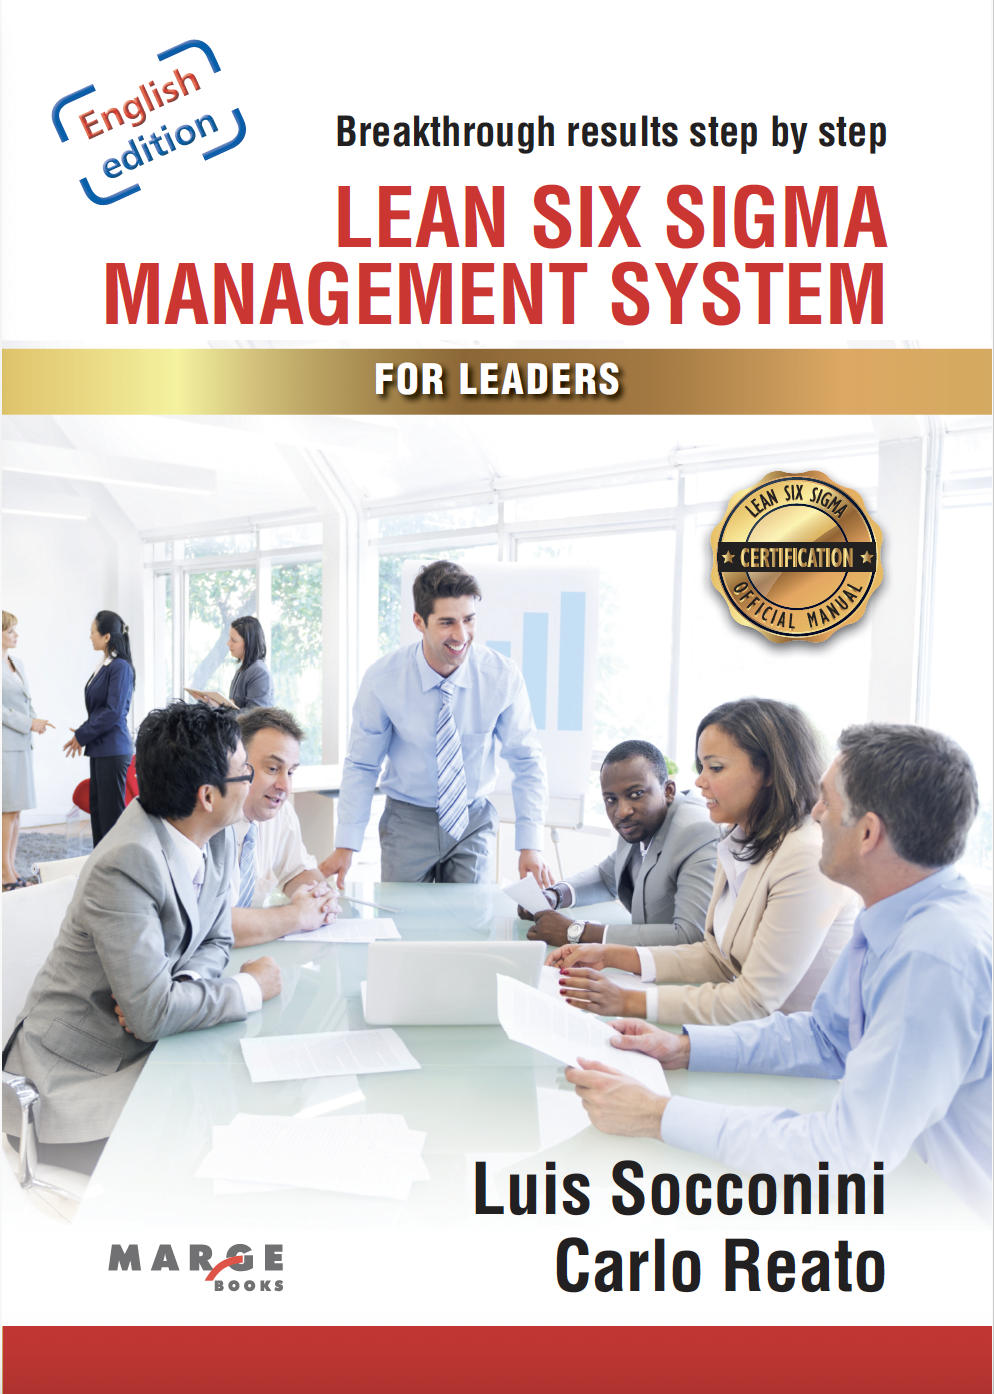 Lean Management System for Leaders